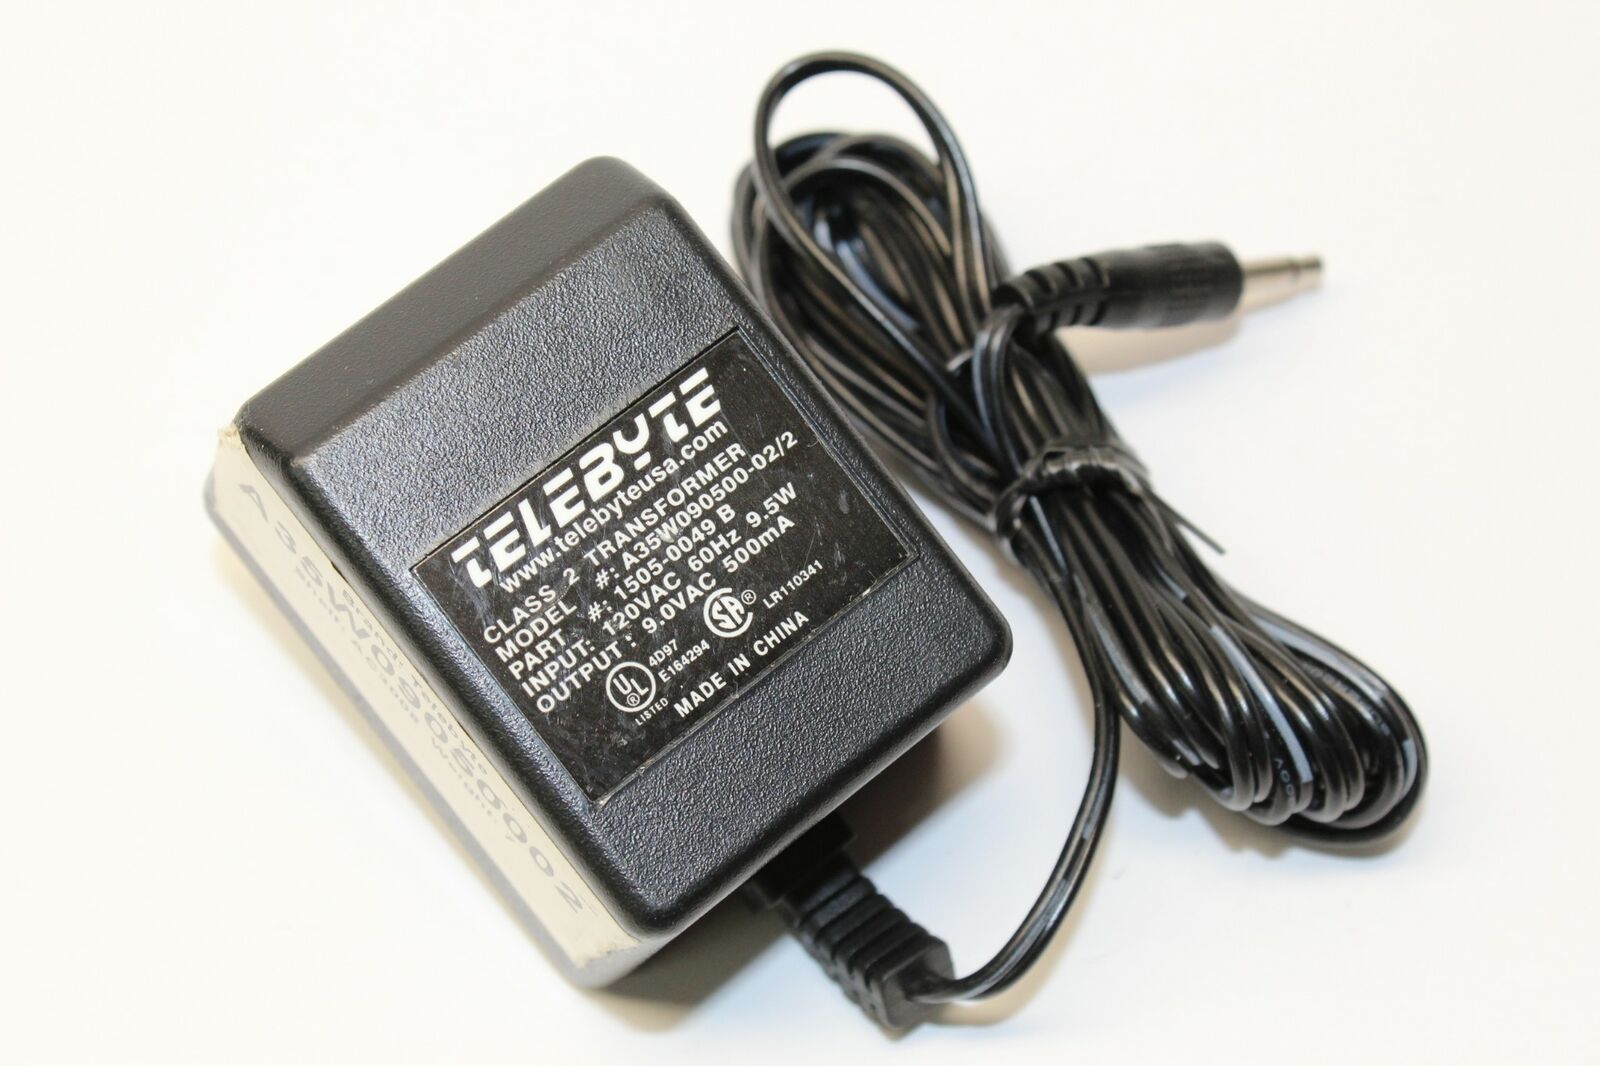 *Brand NEW* DELTA A35W090500-02/2 1505-0049 B 9.0VAC 500mA 9.5W AC DC ADAPTE POWER SUPPLY - Click Image to Close